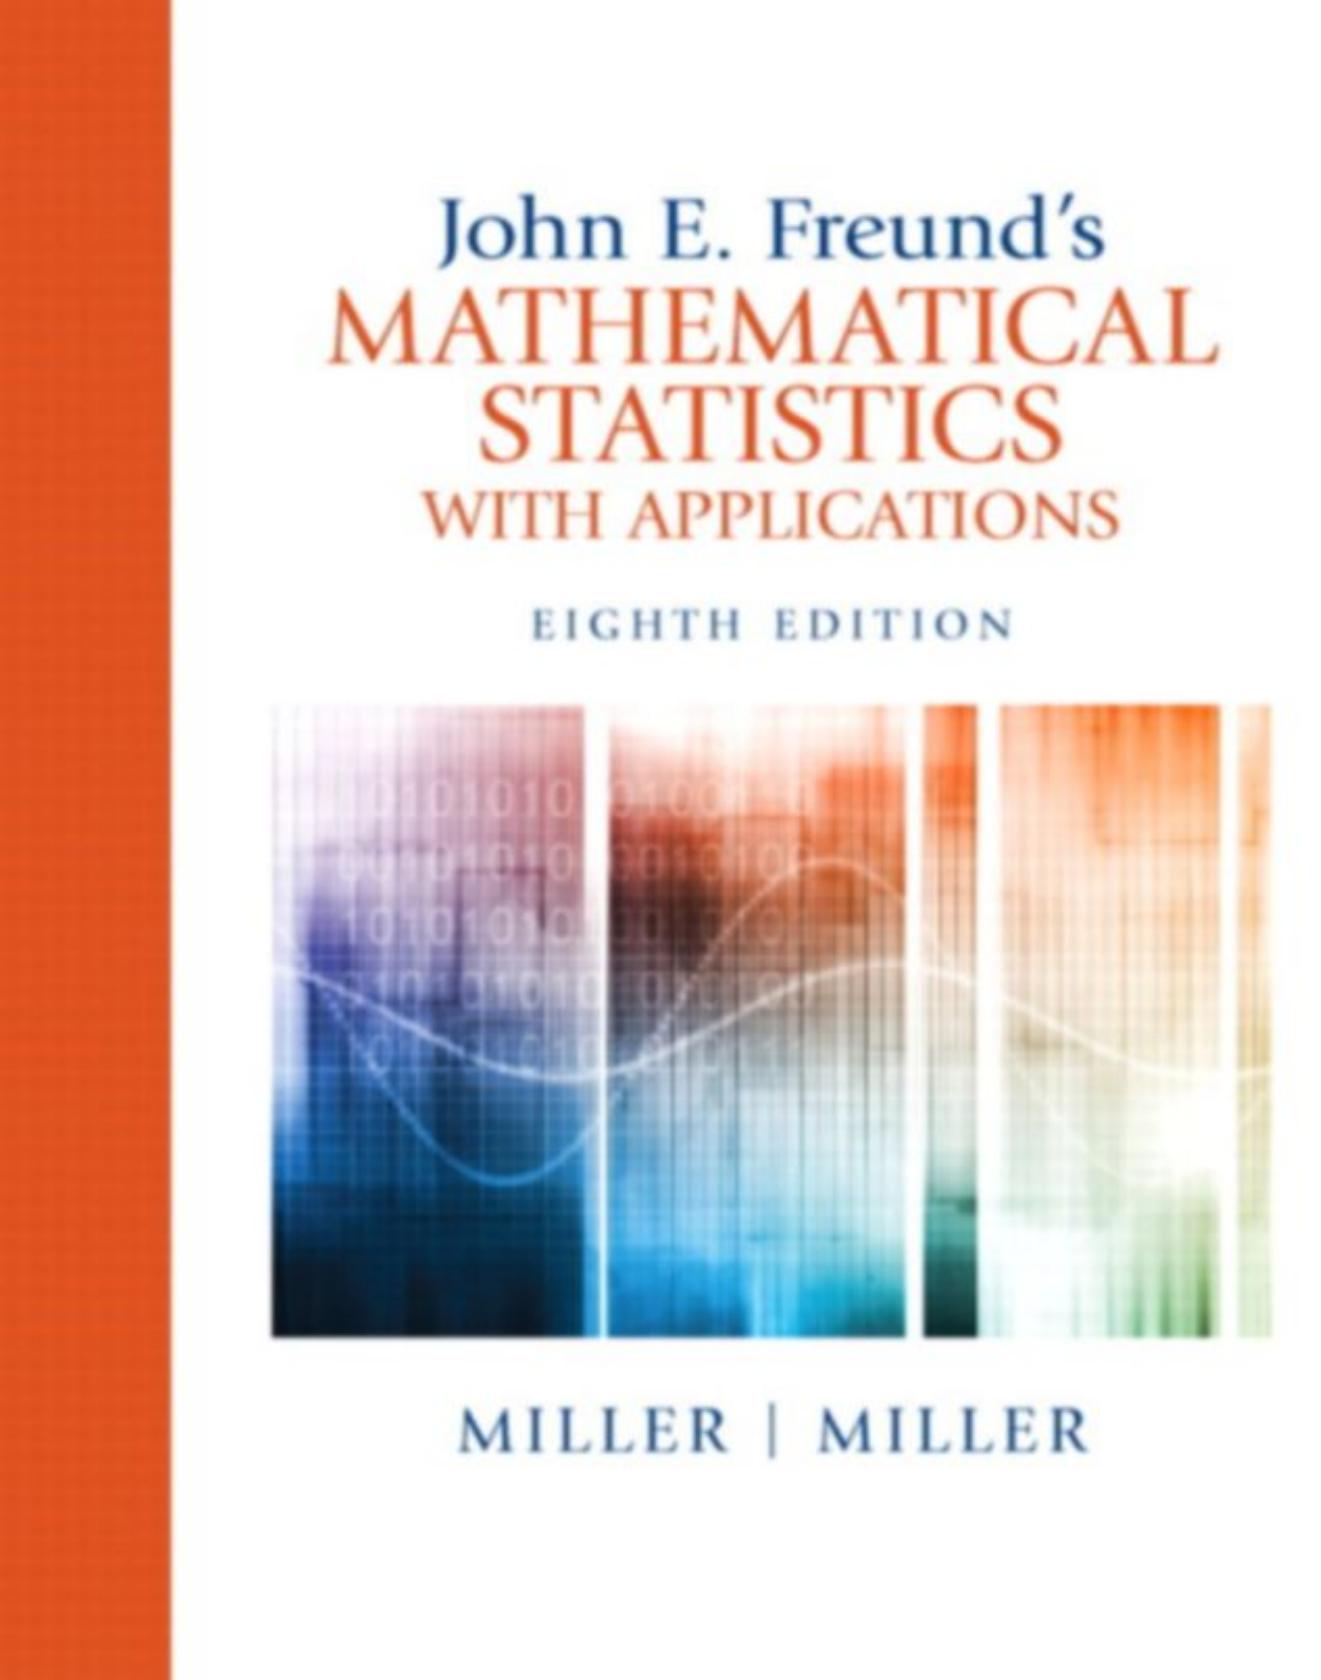 John E. Freund's Mathematical Statistics with Applications Irwin Miller Marylees Miller Eighth Edition 2017